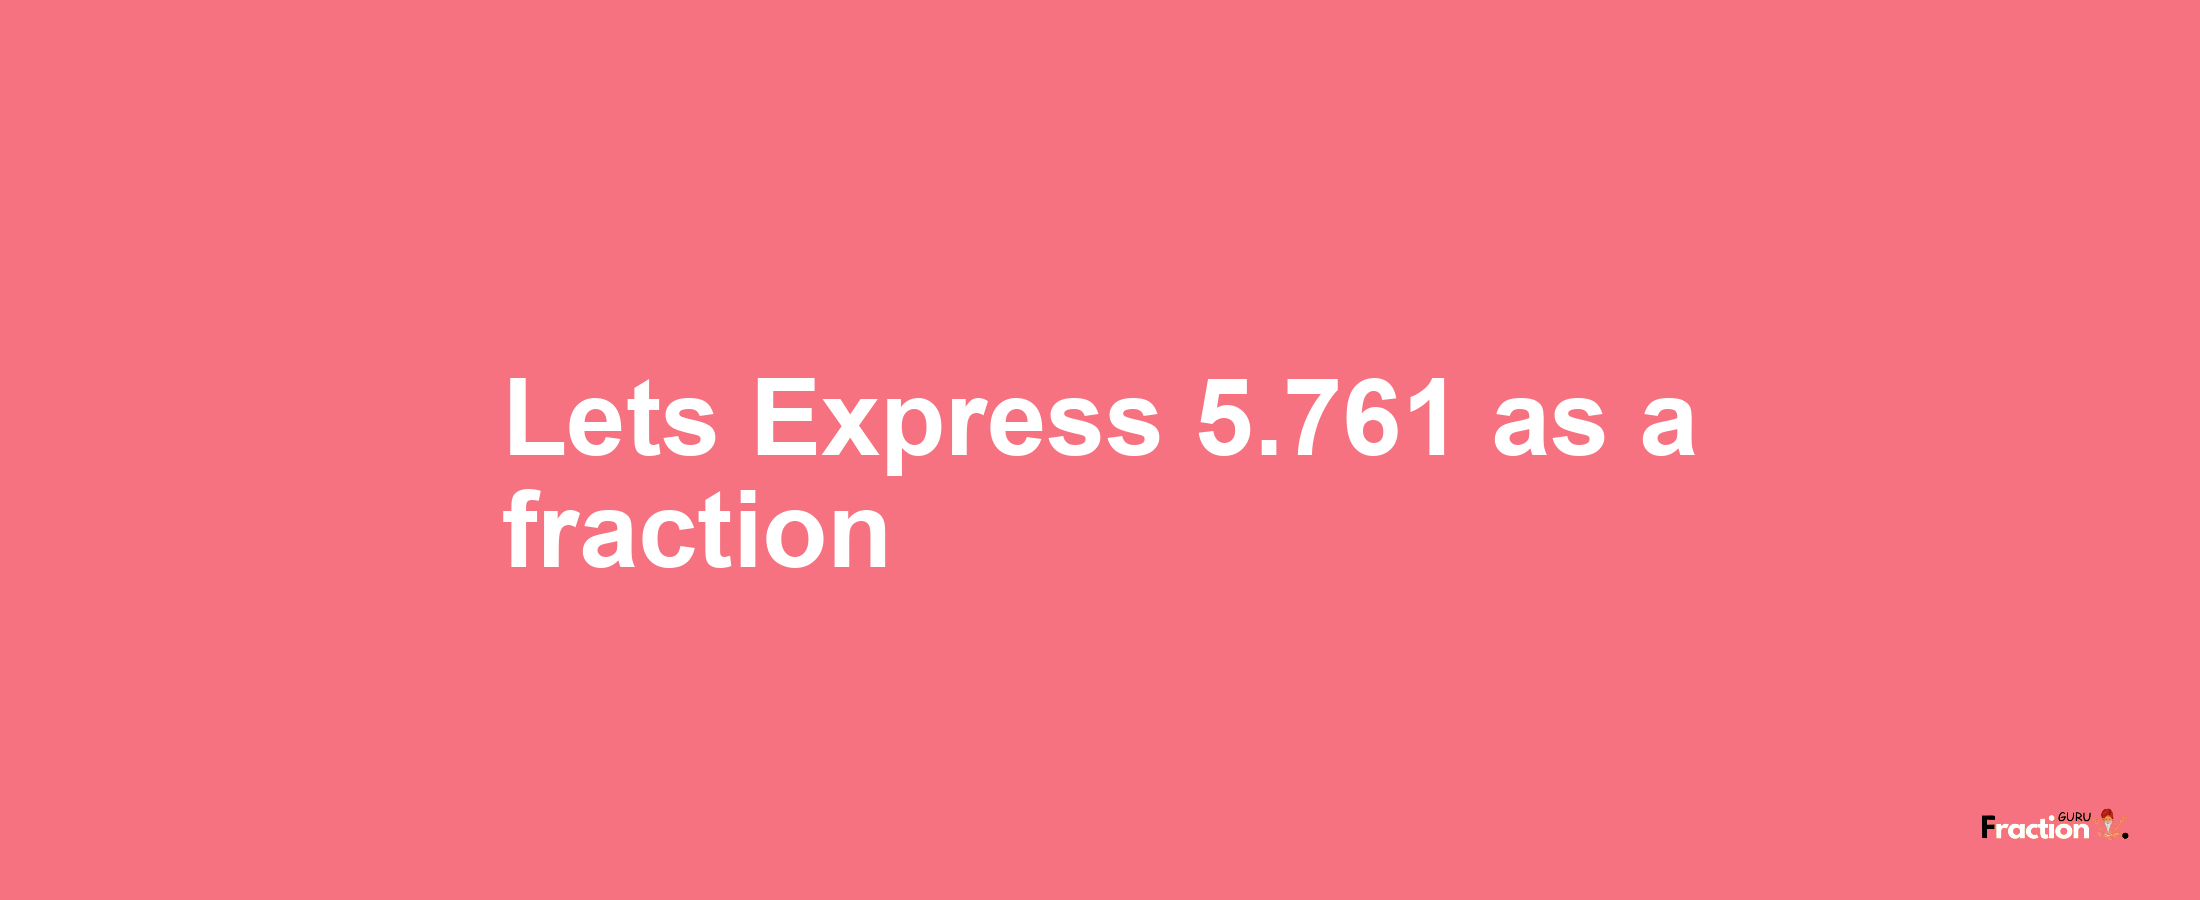 Lets Express 5.761 as afraction